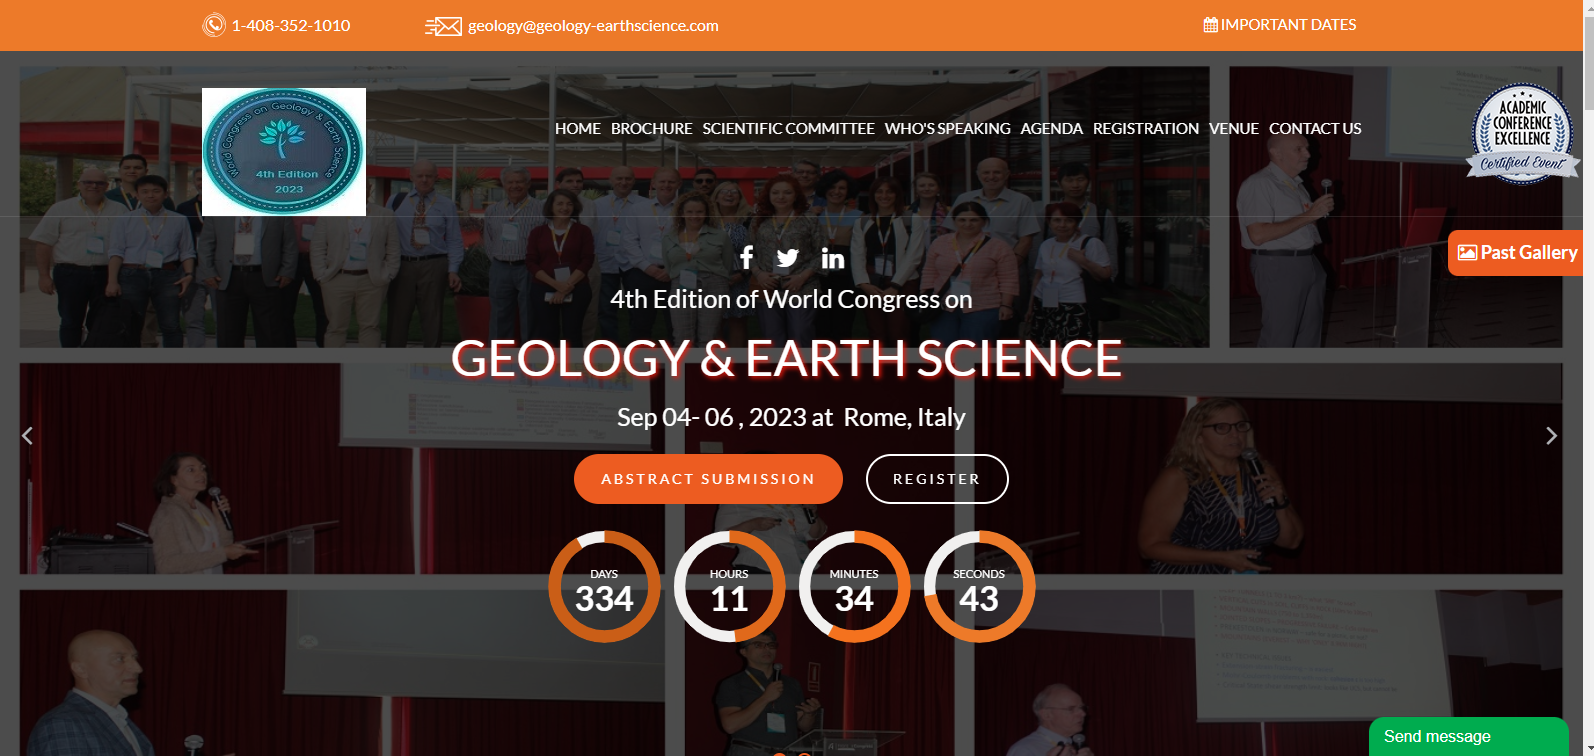 4th Edition of World Congress on GEOLOGY&EARTHSCIENCE Sep04-06,2023atRome,Italy, Online Event